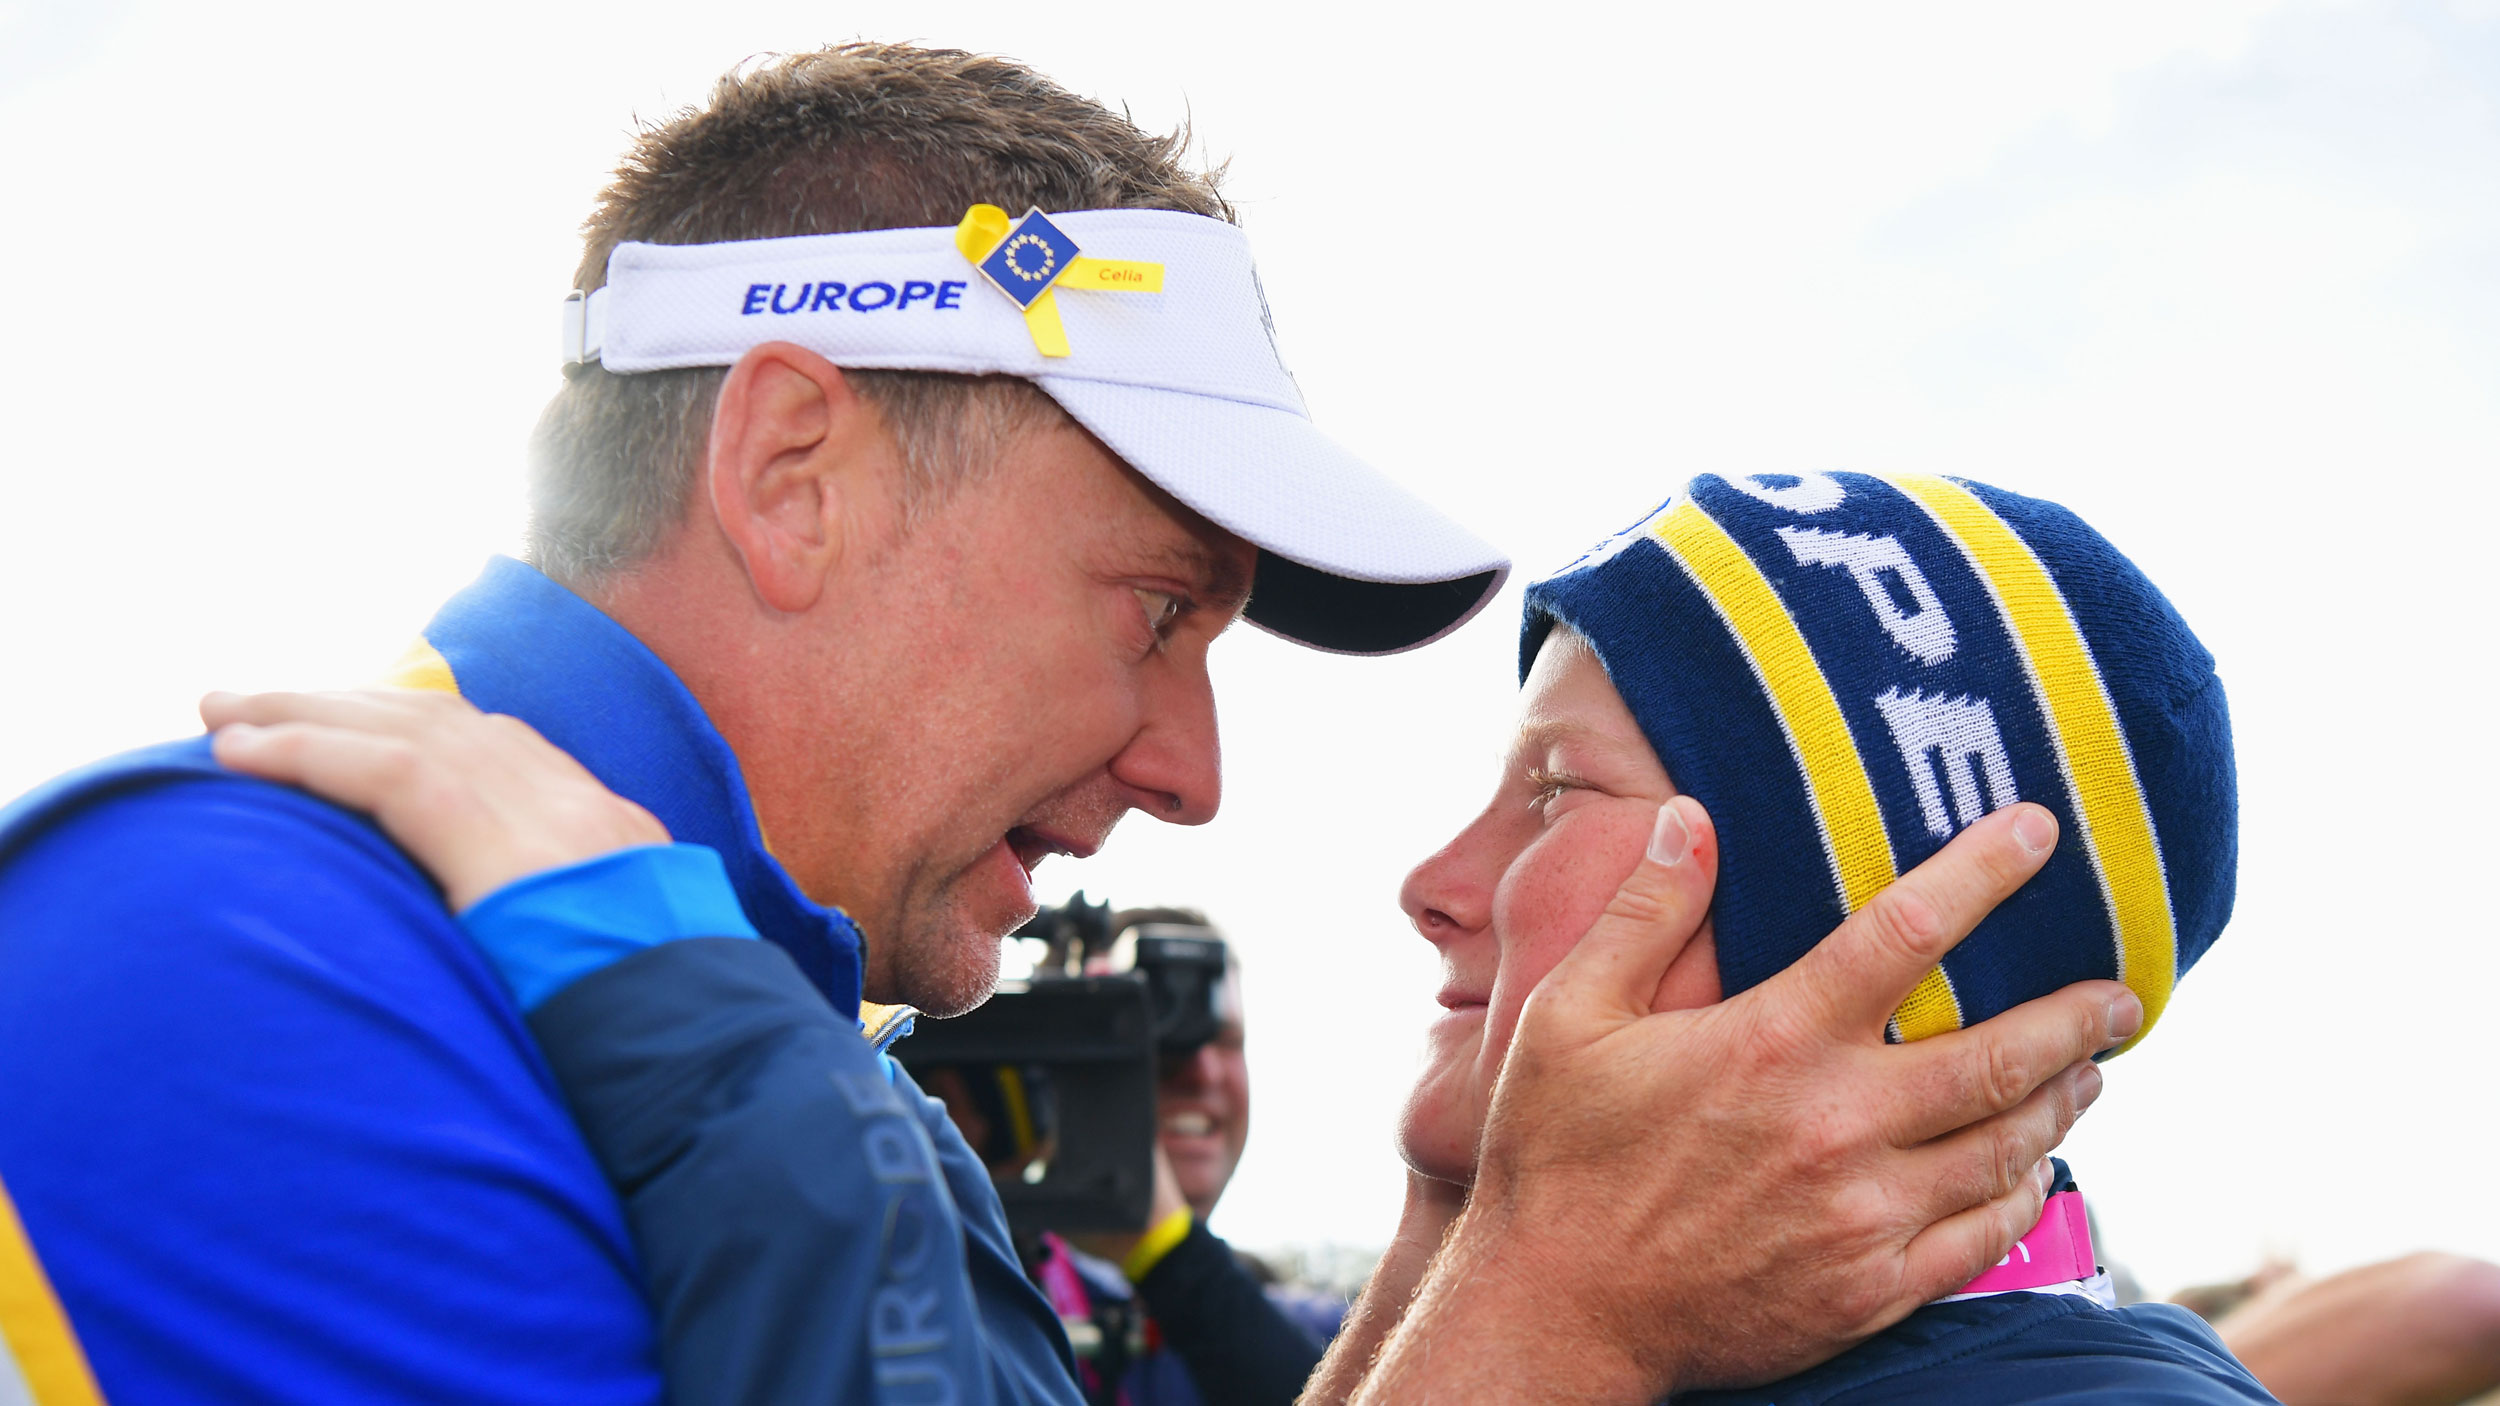  'I know he is going to beat me soon' – Ian Poulter on 'rivalry' with son Luke 